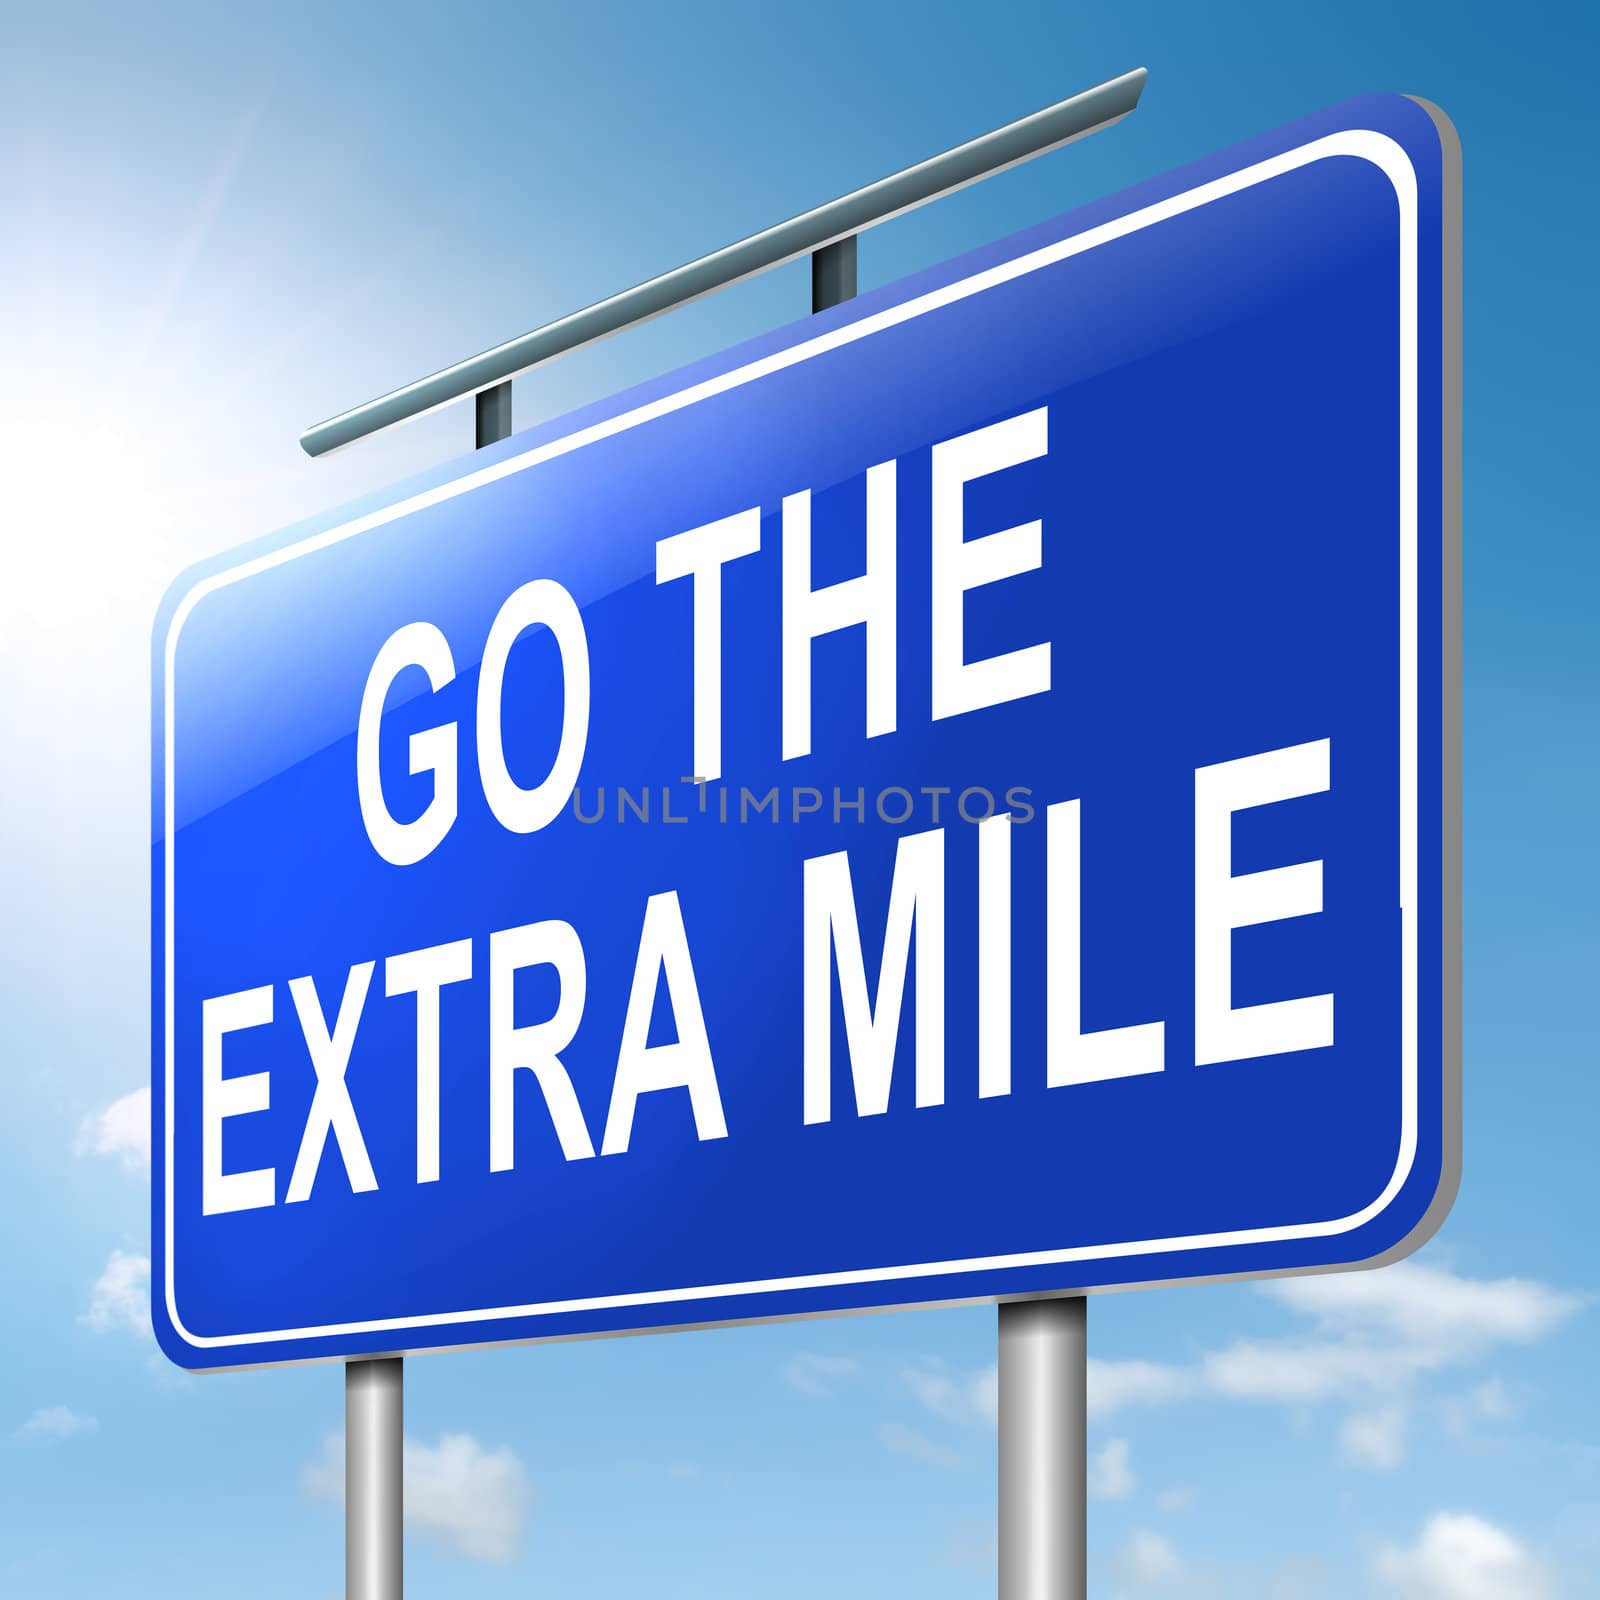 Illustration depicting a roadsign with a 'go the extra mile' concept. Sky background.